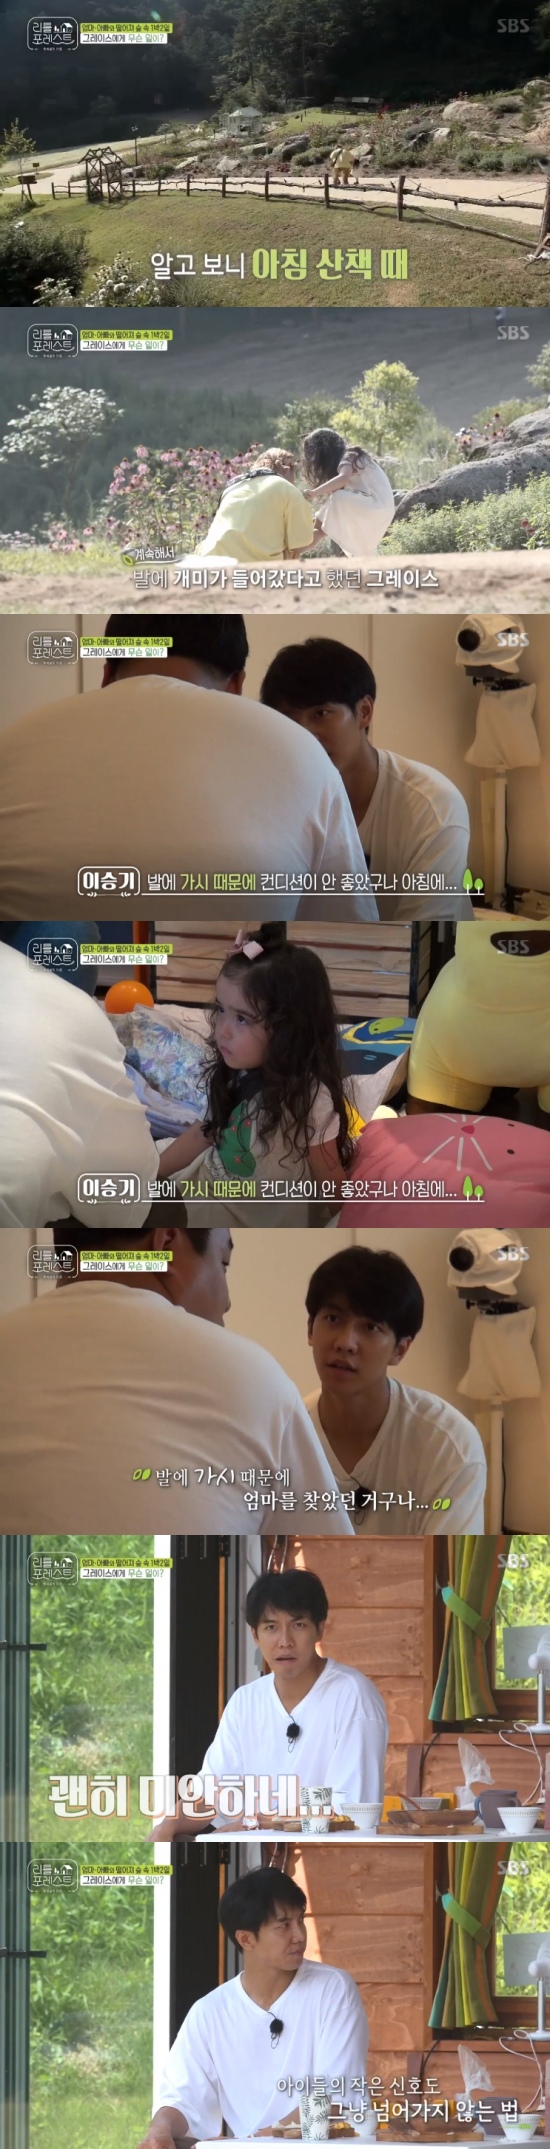 Singer Lee Seung-gi got enlightenment through childcare.On SBS Little Forest broadcast on the 27th, Lee Seung-gi was sorry for Miss Grace.On this day, Miss Grace suddenly found her mother and shed tears. Lee Han-gun informed Lee Seung-gi, and Lee Seung-gi headed straight to Miss Grace.Miss Grace cried with a sketchbook that read MOM, and Lee Seung-gi said, Do you want to see your mom, my uncle wants to be with Grace.Lee also worried about Miss Grace, saying, Please call me. Grace cried. My mother is coming in the car.Lee Seung-gi also took Ms Grace to The Kitchen, who told the other members: Grace cried.I want to see my mother, he said.Park Na-rae recalled later on Grace saying her feet were sore.Earlier, Ms Grace had complained of ants entering her shoes while she was on a morning walk with Park Na-rae.Lee Seung-gi gave Ms Grace a steaming of ice on her feet and when she didnt get better, she asked for help from Tim Doctor.Tim Doctor looked at Miss Graces foot and explained that she had a thorn.Lee Seung-gi then went back to The Kitchen, and Park Na-rae was upset, saying, I kept doing that - the ant asked.Lee Seung-gi felt sorry, saying, I learn again, the children have no nonsense signs, and Park Na-rae sympathized, saying, I thought I was talking about ants.Photo = SBS Broadcasting Screen